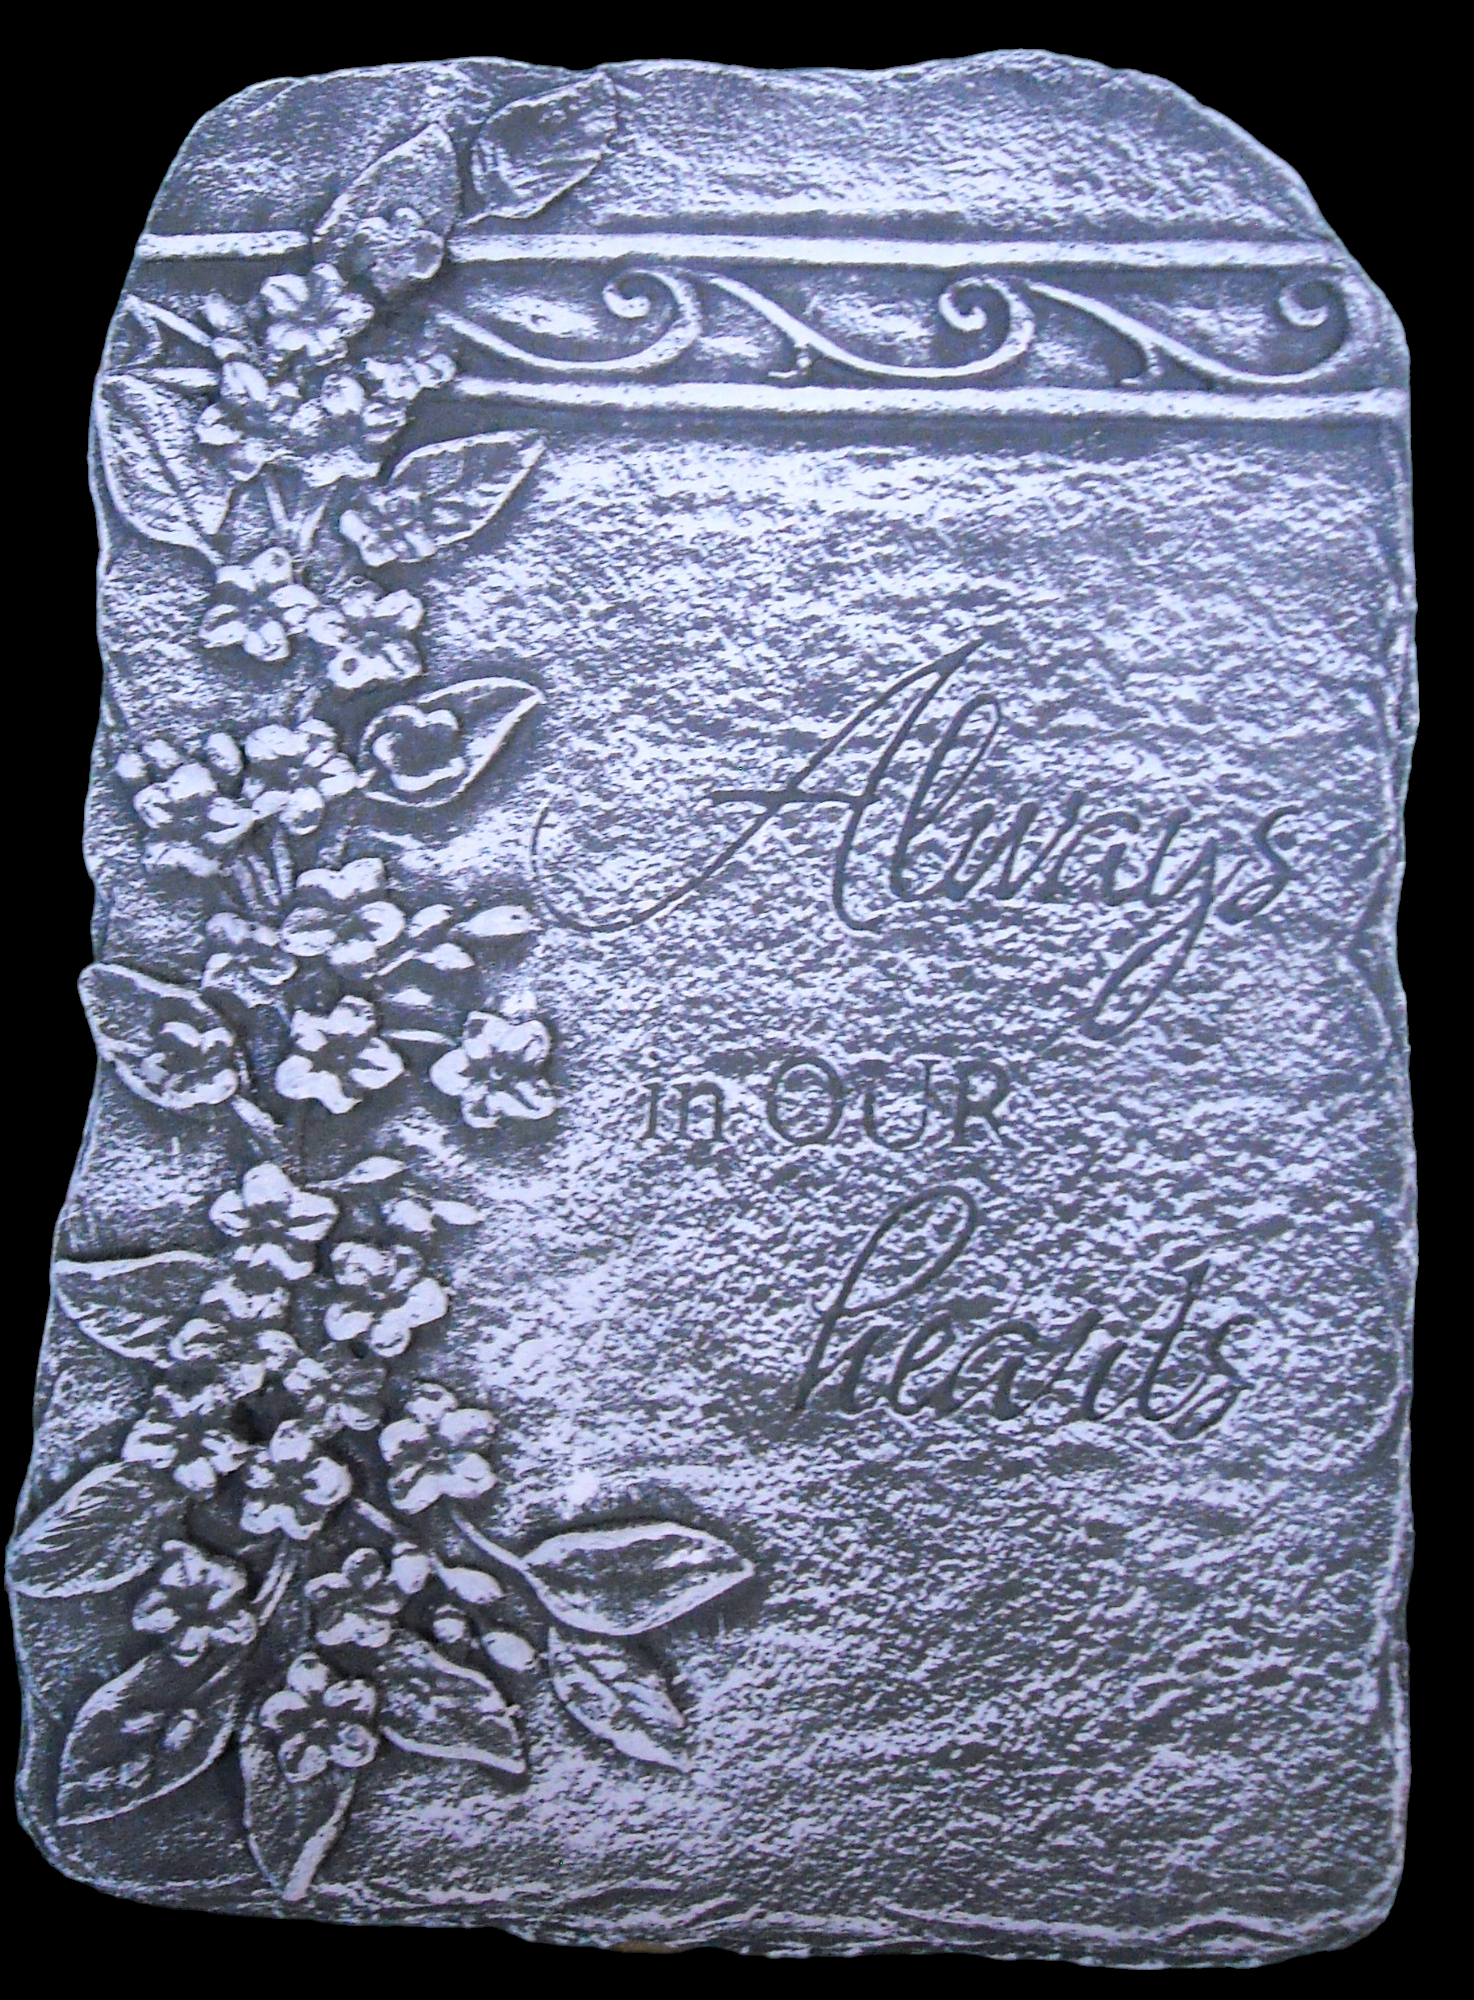  Always In Our Hearts Memorial Stone
10" x 14" 